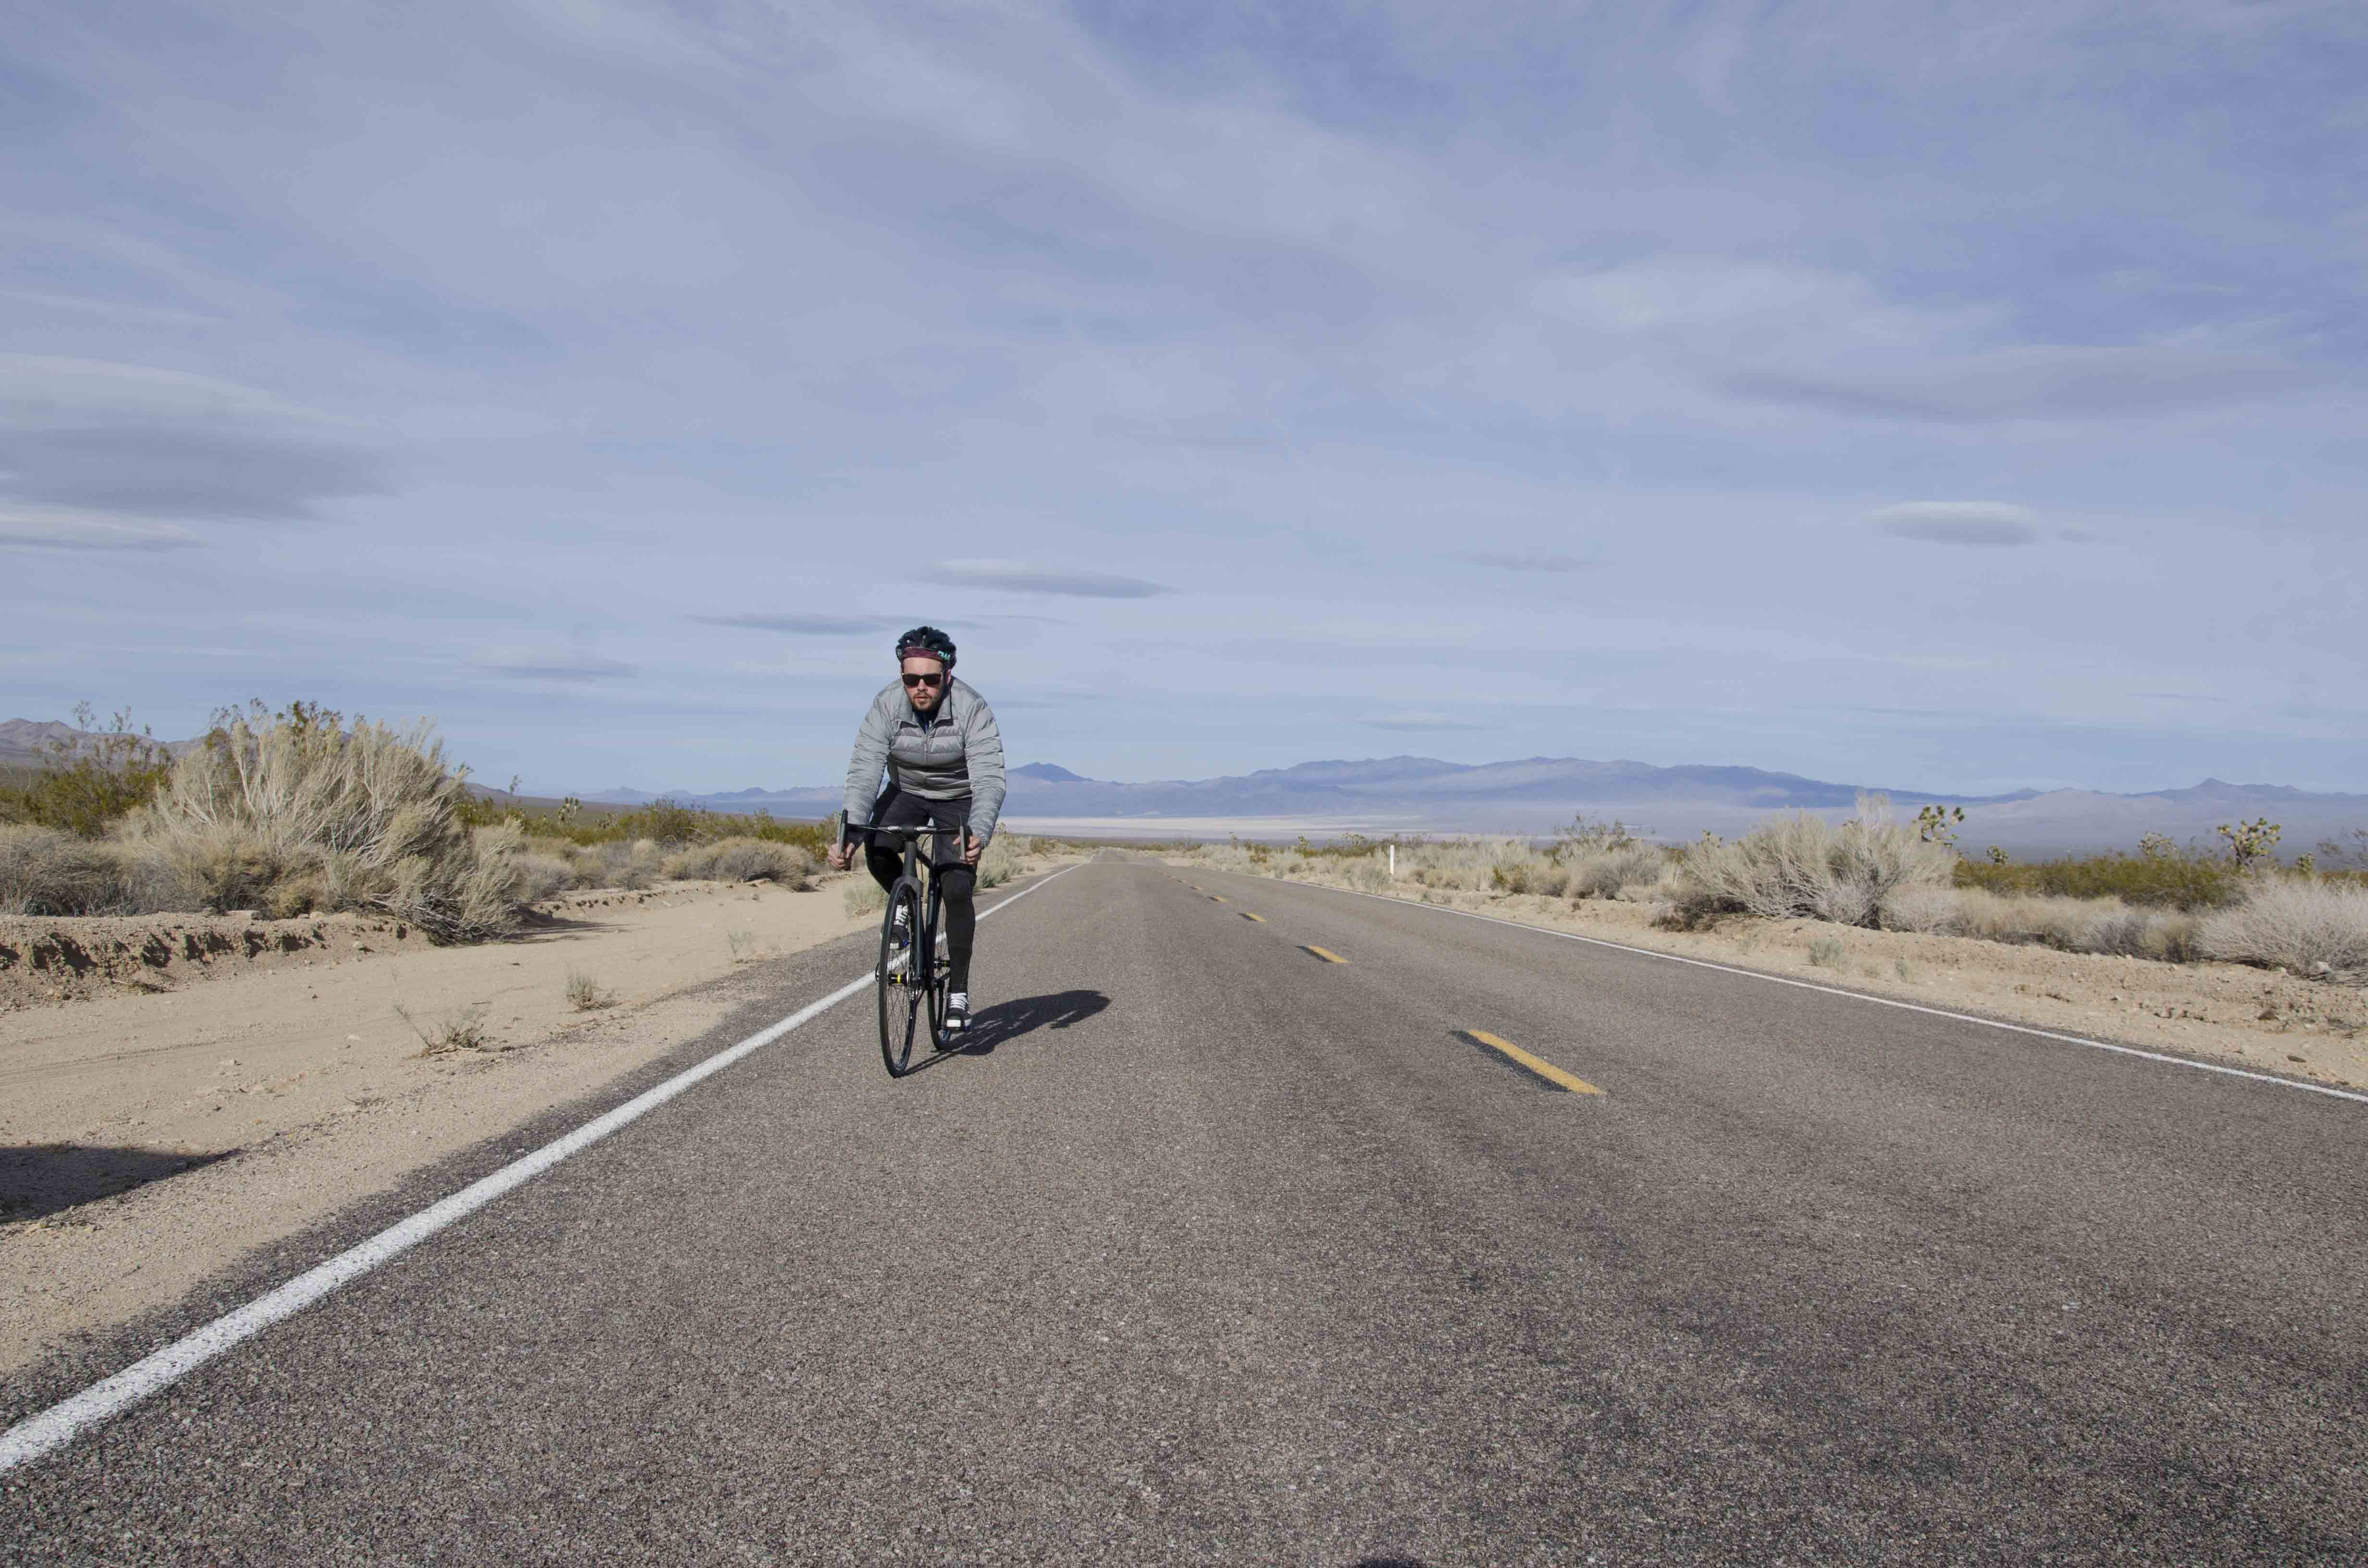 Sculpteo-Bike-Project-on-the-road Mojave desert